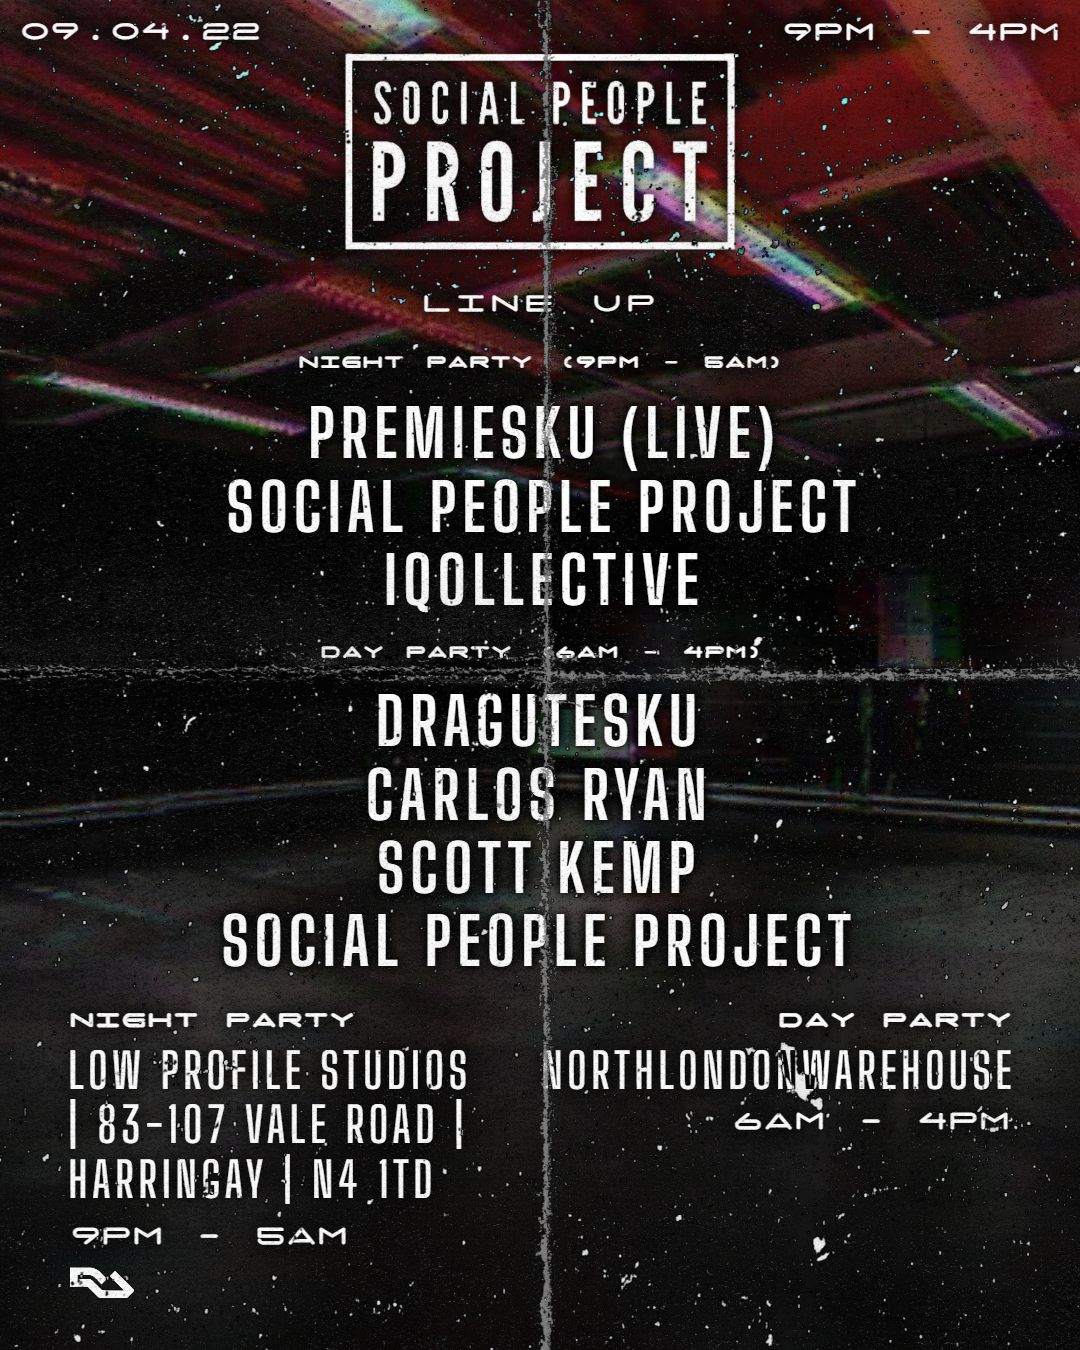 Social People Project 18hr Warehouse Party with Premiesku (live) - フライヤー裏